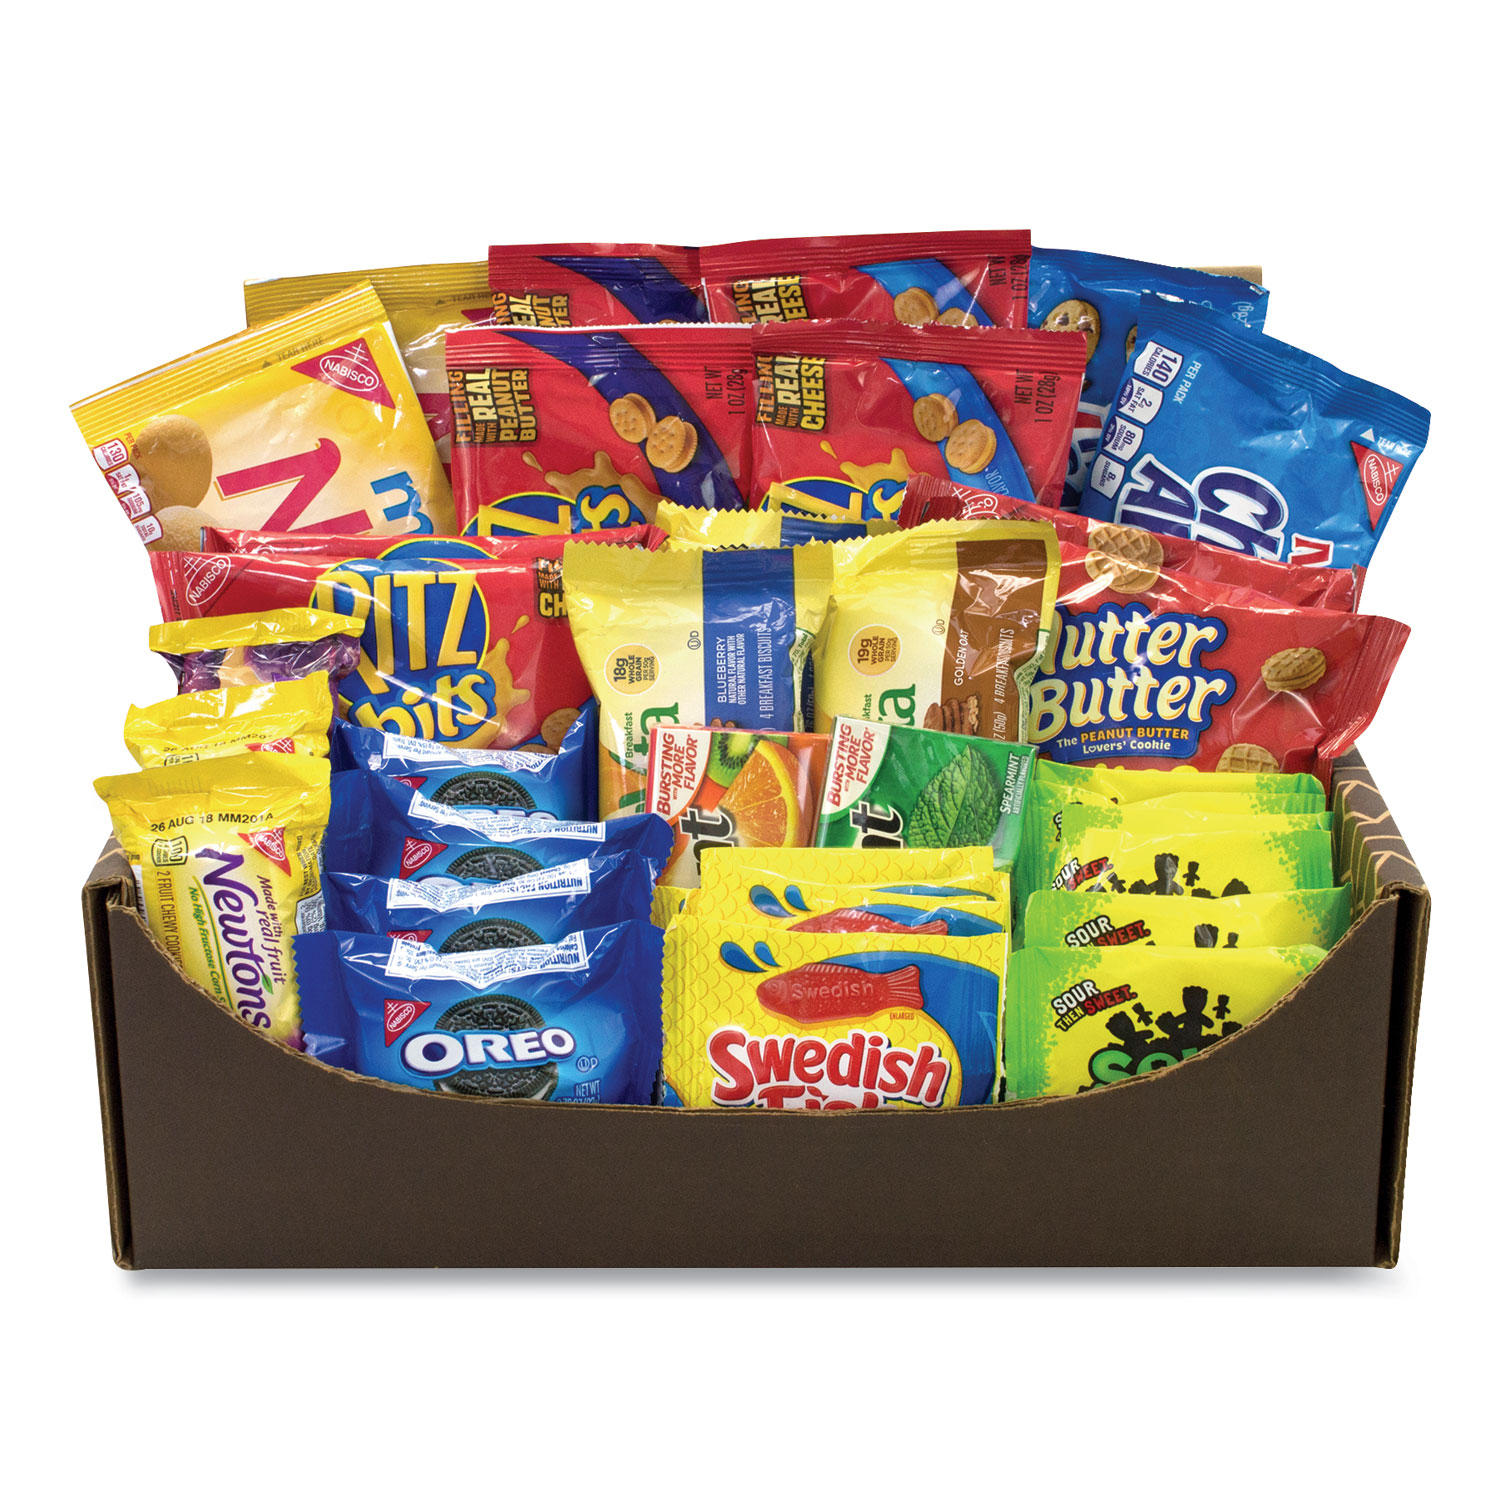  Snack Box Pros 70000037 Snack Treats Variety Care Package, 40 Assorted Snacks, Free Delivery in 1-4 Business Days (GRR70000037) 